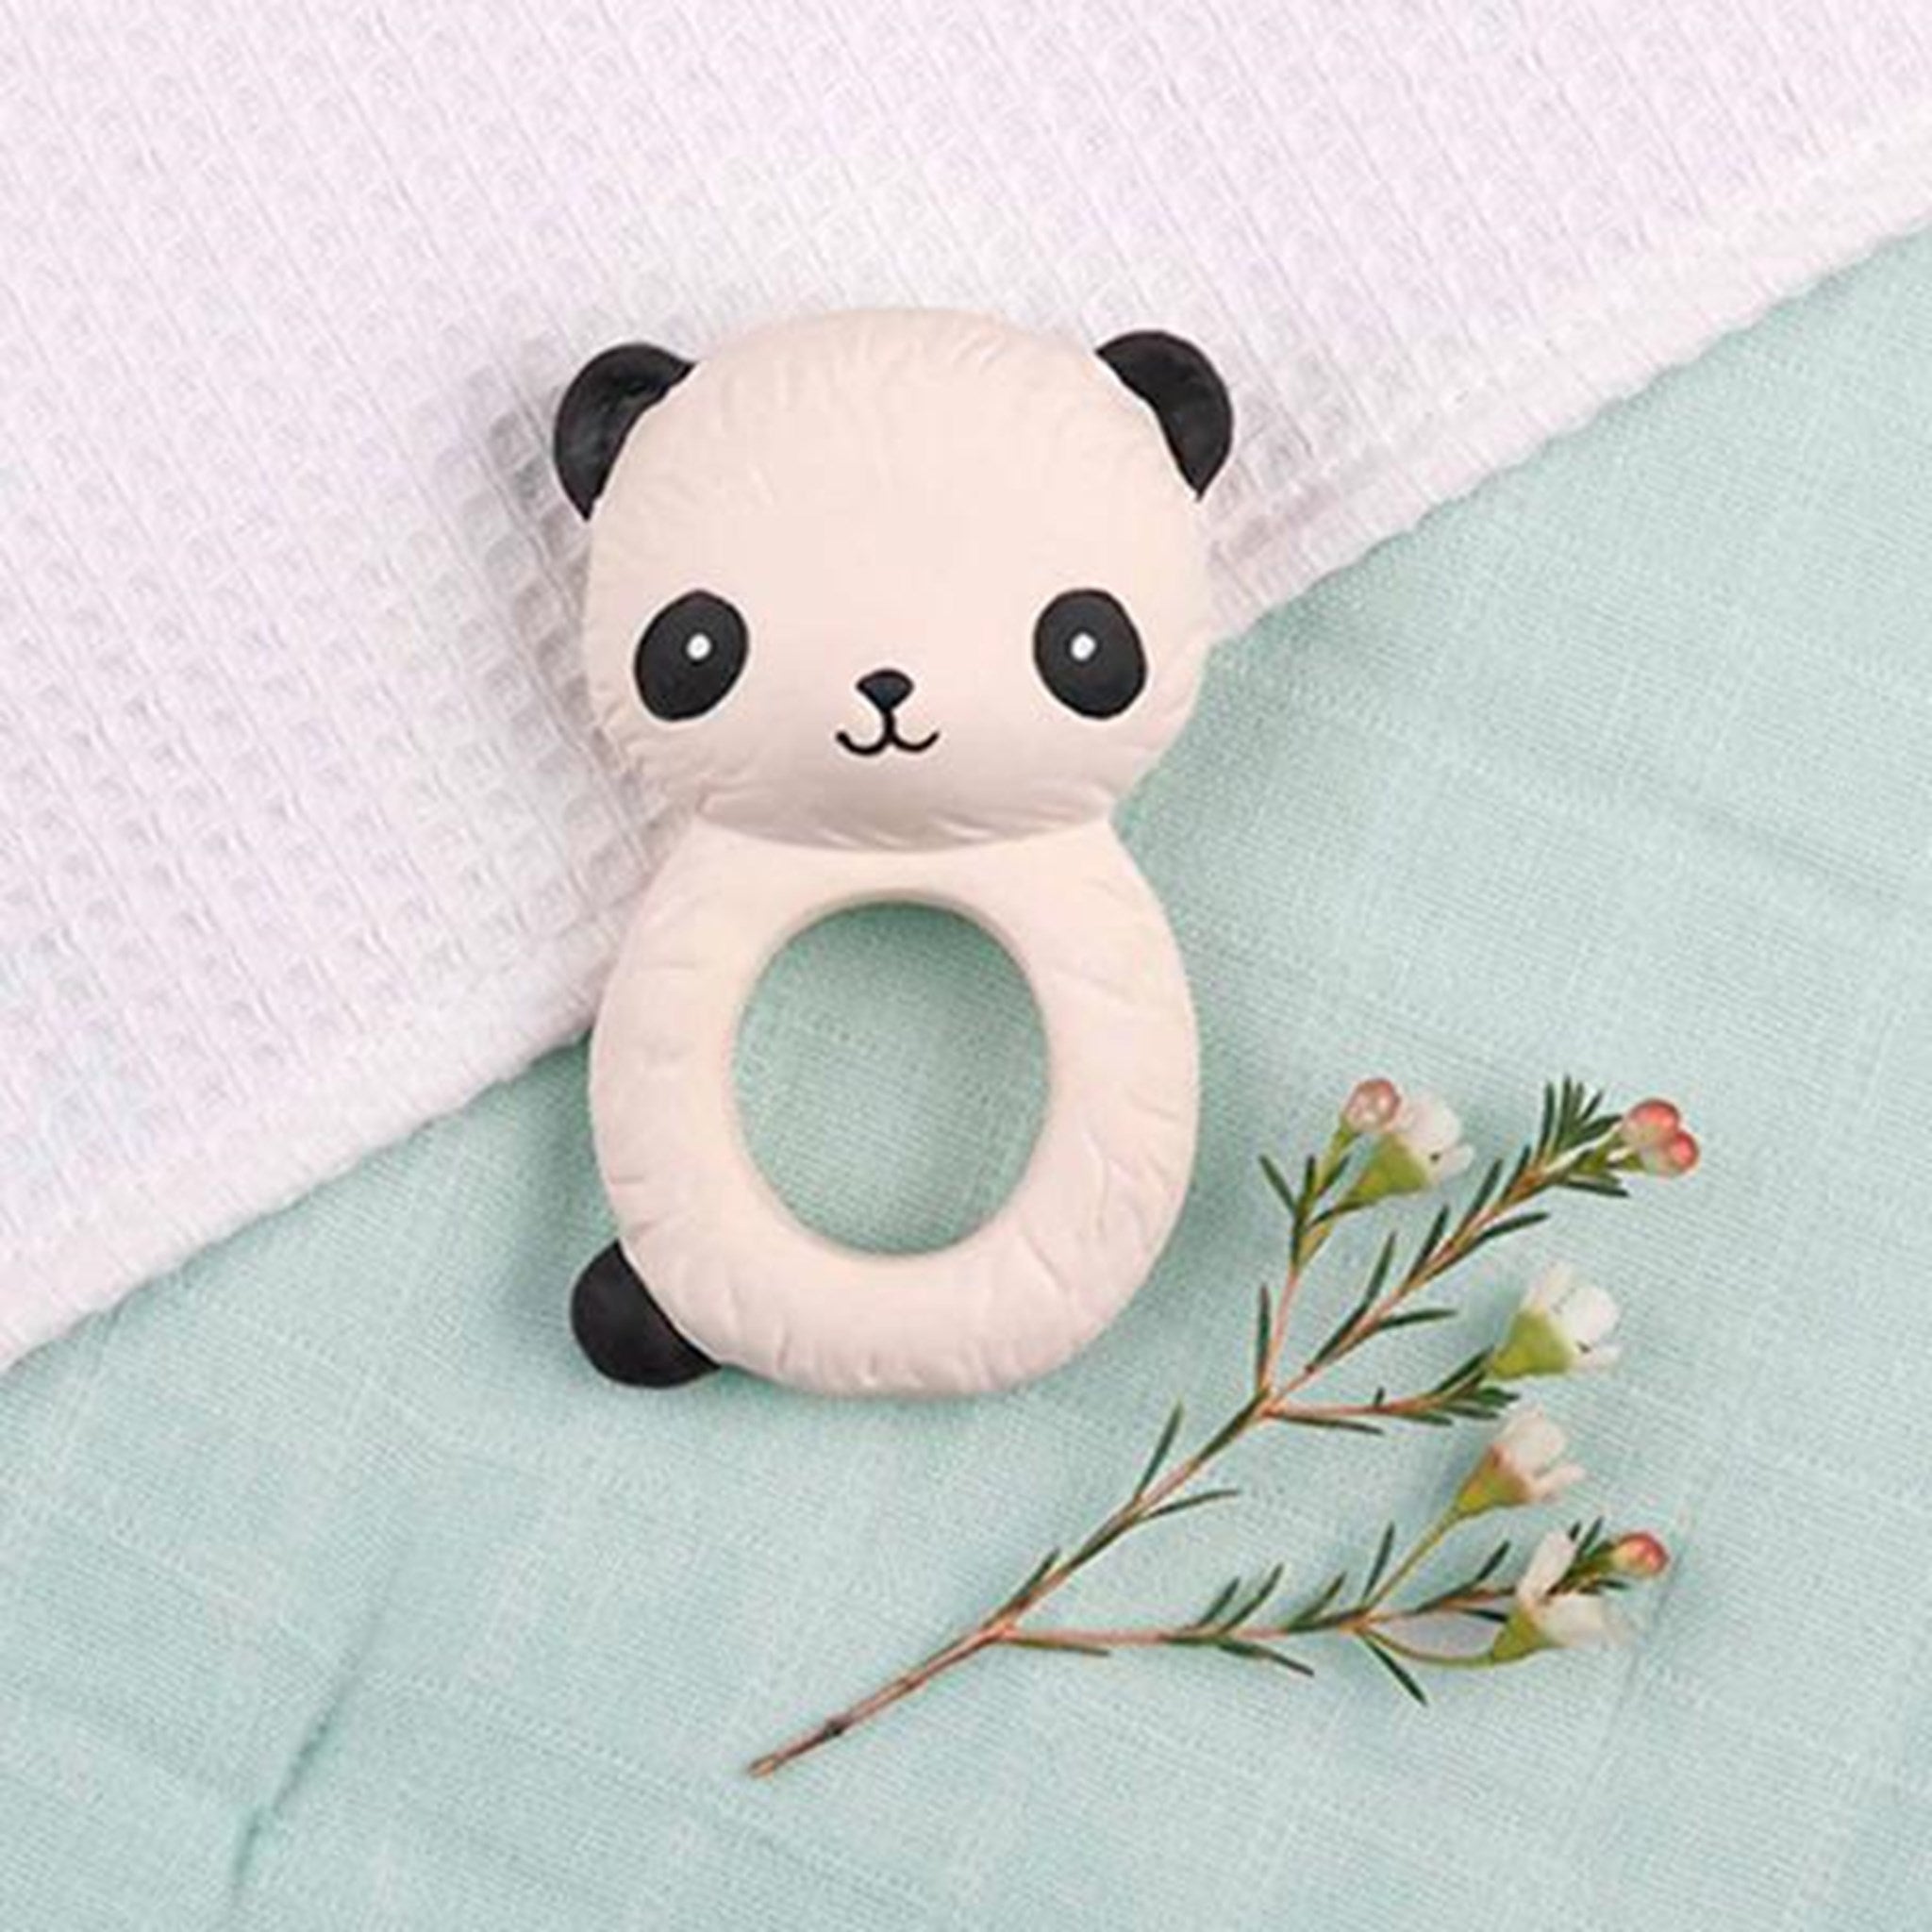 A Little Lovely Company Teether Ring Panda 3